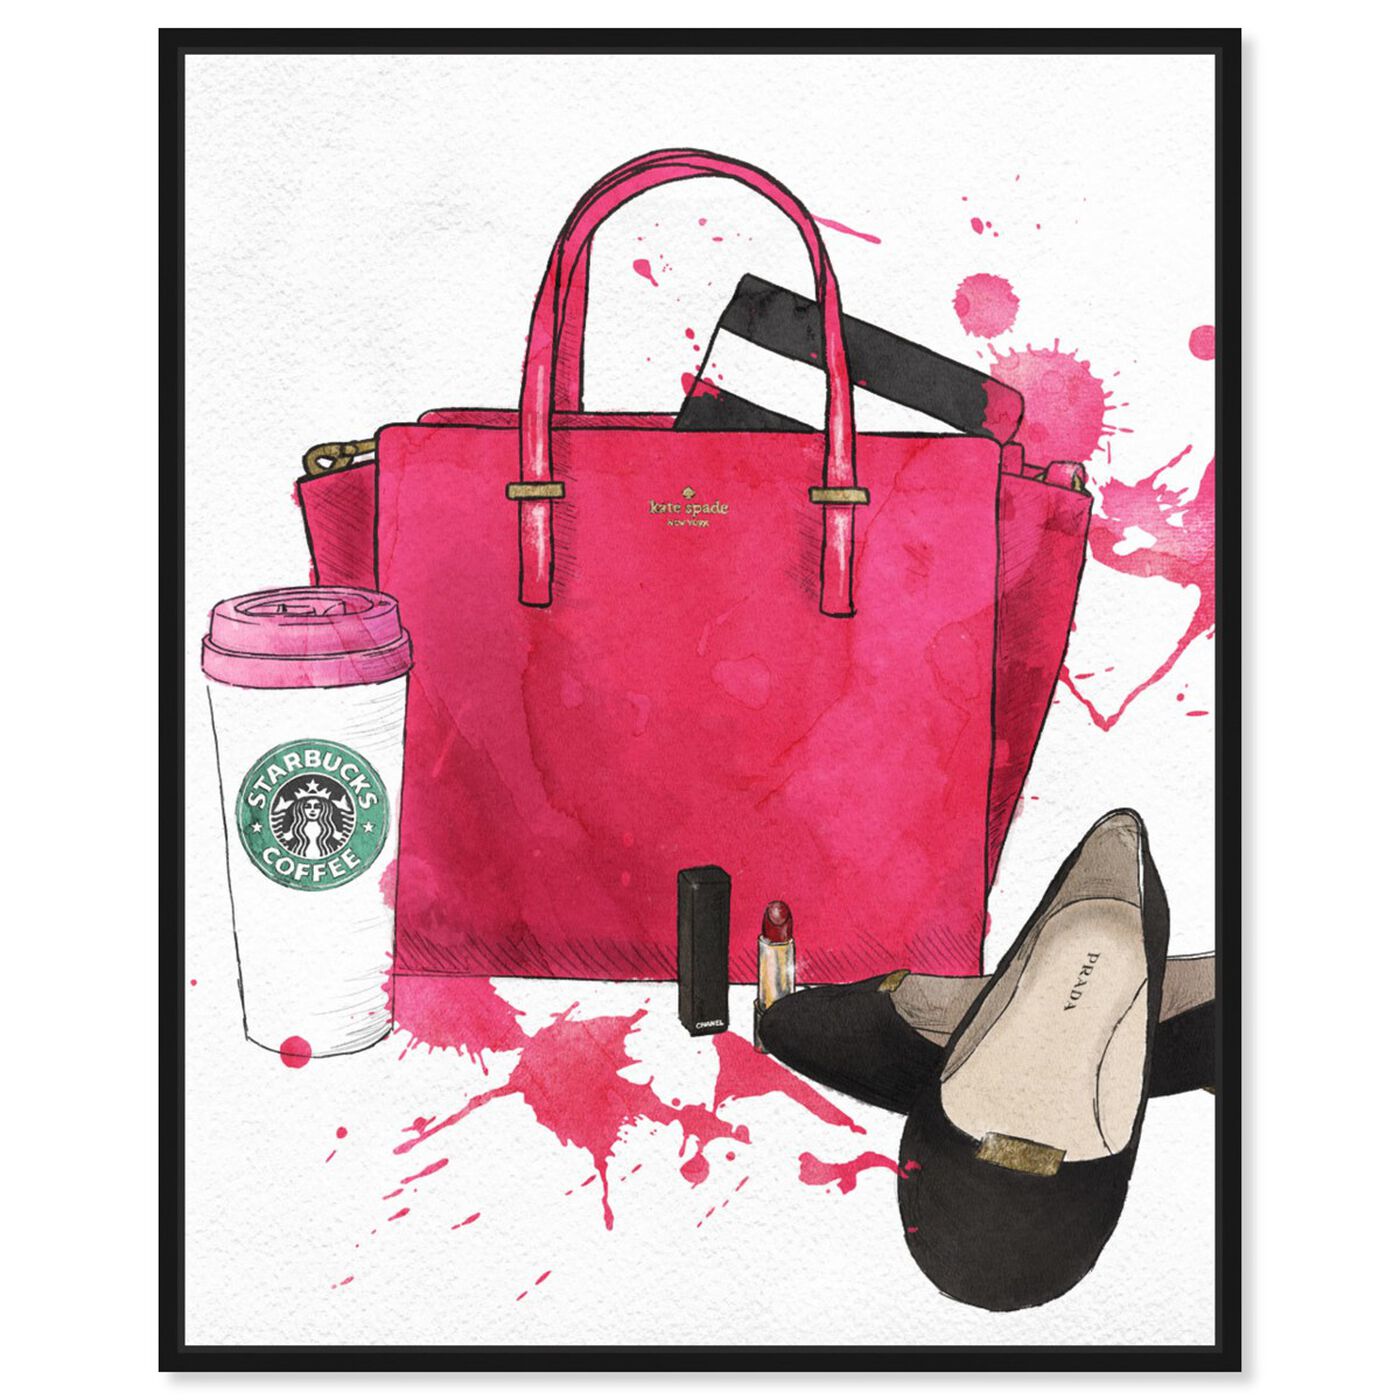 Front view of Bags, Shoes, and Coffee featuring fashion and glam and handbags art.